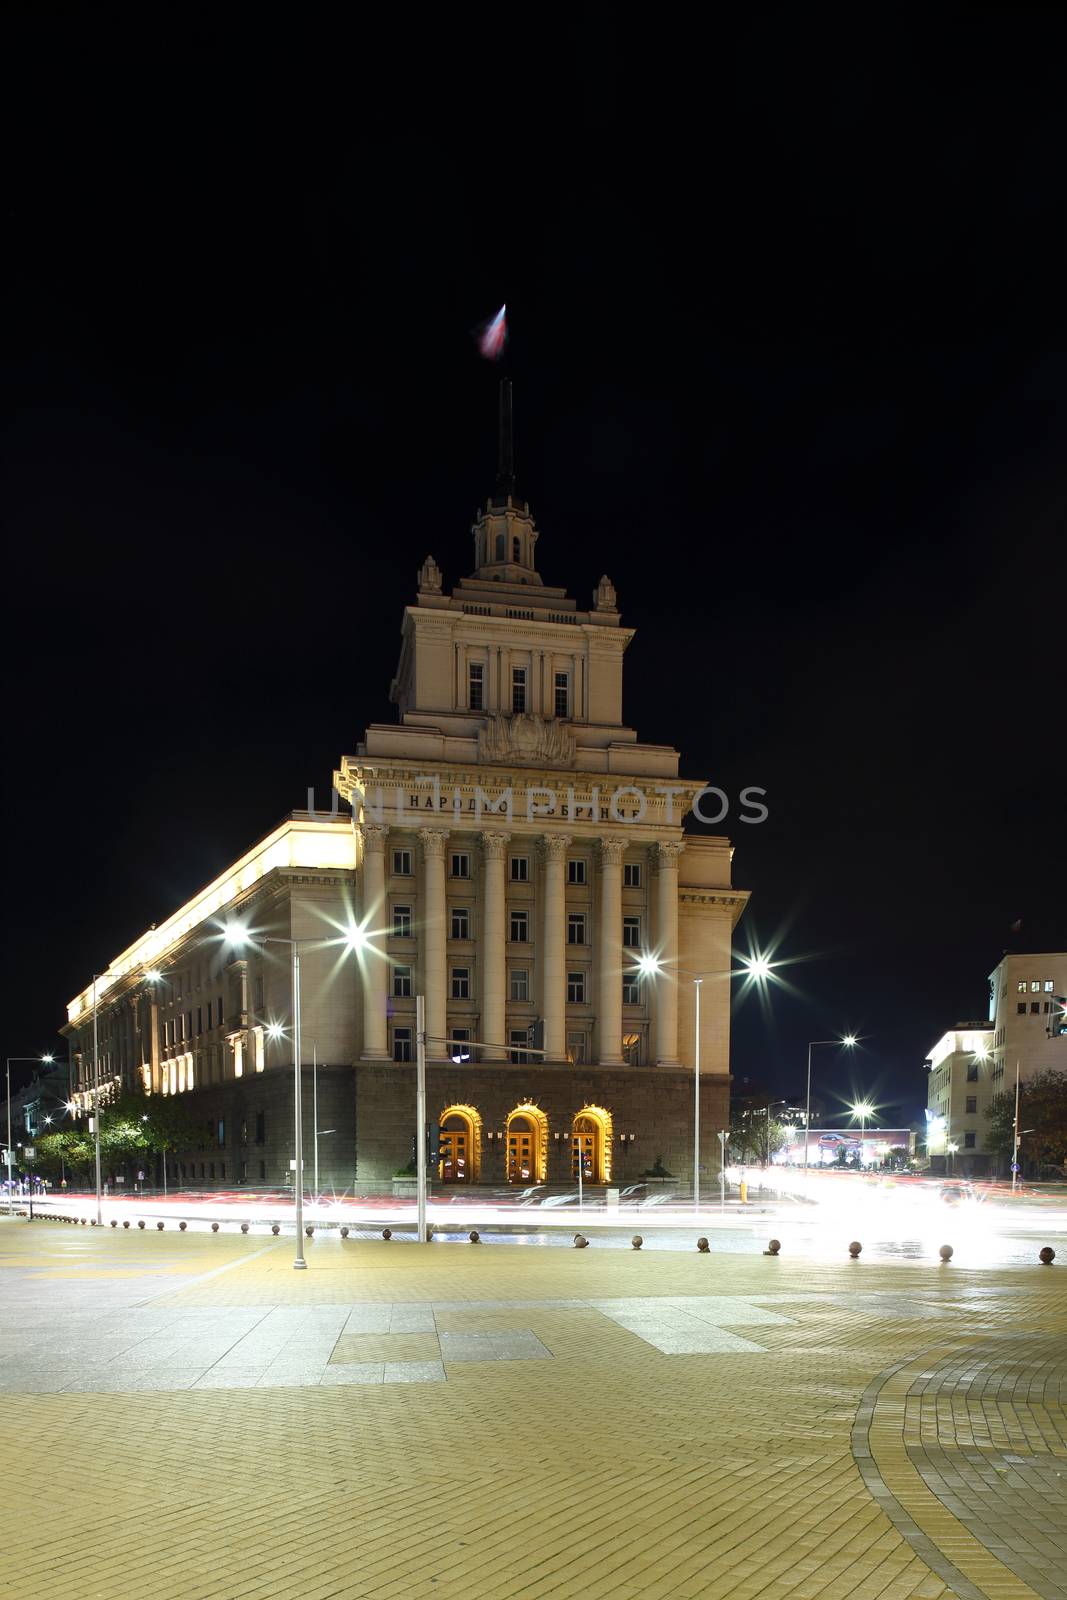 Office house of the National Assembly of Bulgaria by night